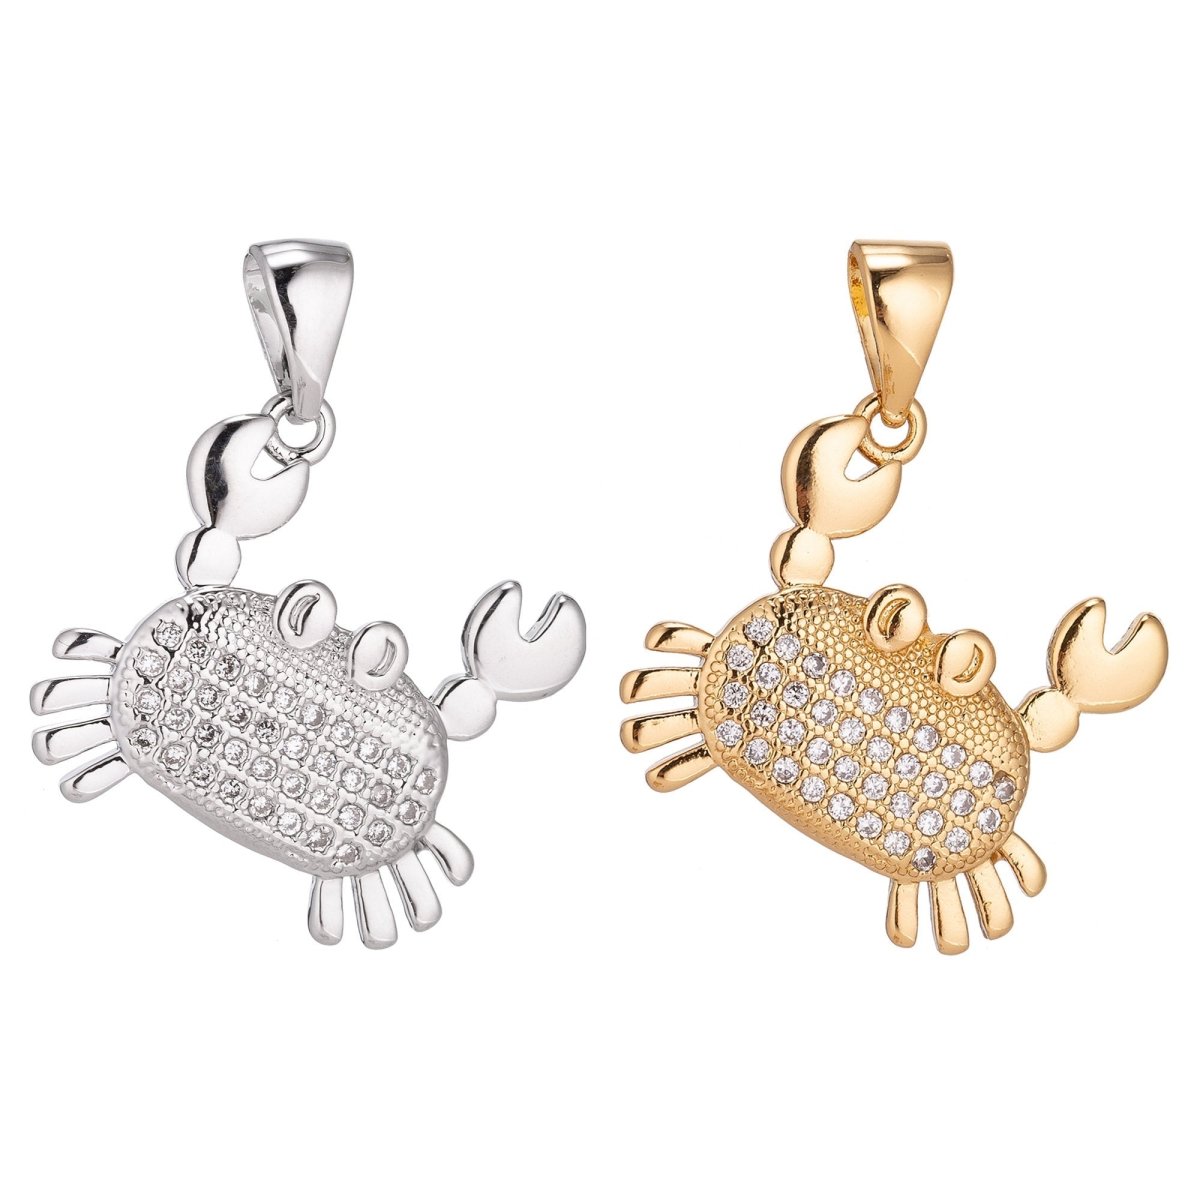 18K Gold Filled Pendant Dainty Crab Necklace Charm for Jewelry Making Stylish Crab Charm, Micro Pave CZ Charm H-915 - DLUXCA